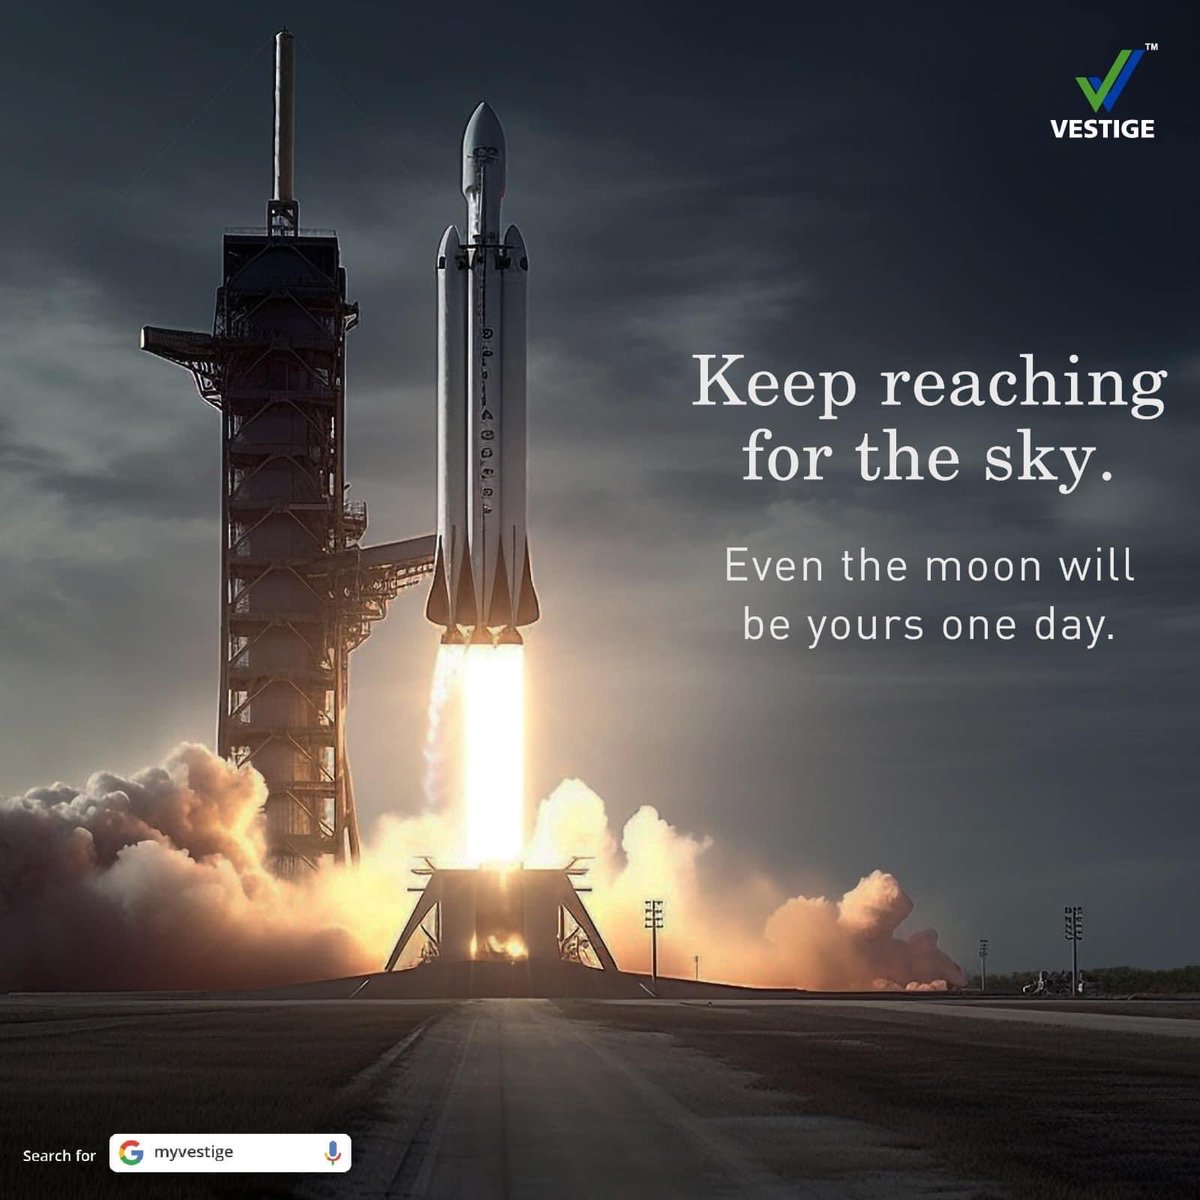 Together, let's redefine what's possible and push the boundaries of human exploration. 
Chandrayaan 3, where dreams take flight and the moon will reveal its mysteries.

#WishYouWellth #Chandrayaan3